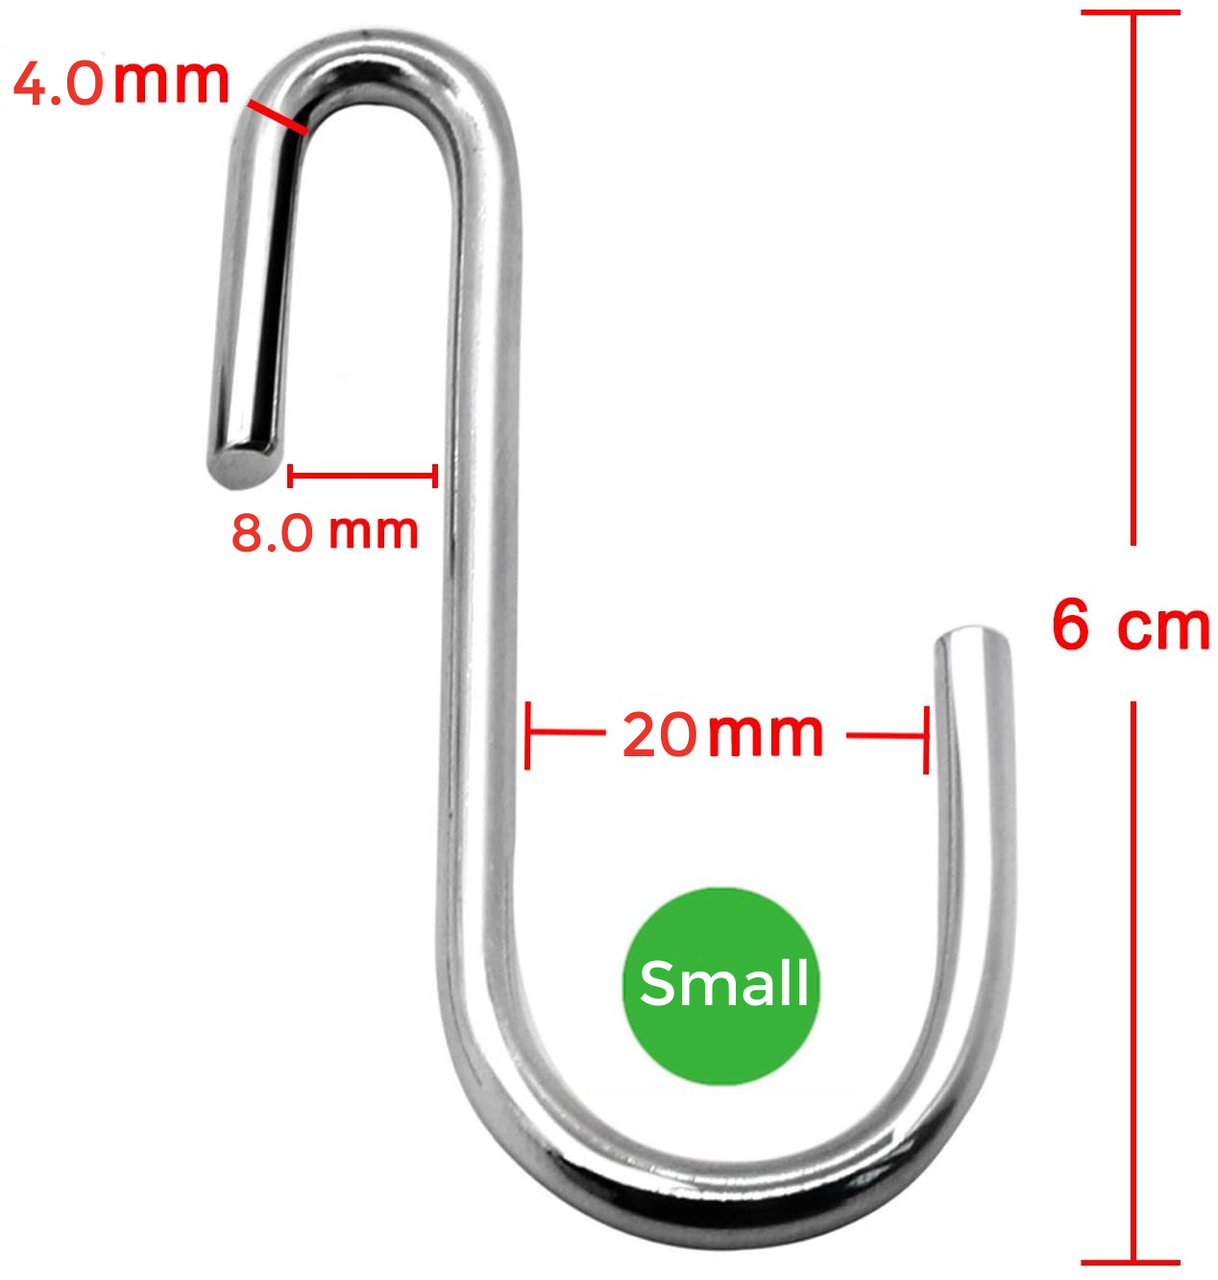 Small Size Heavy Duty S Metal Hooks - Silver Colour - 304 Stainless Steel with 4mm Thick- Sold in 5/25/50 - Rackshop Australia